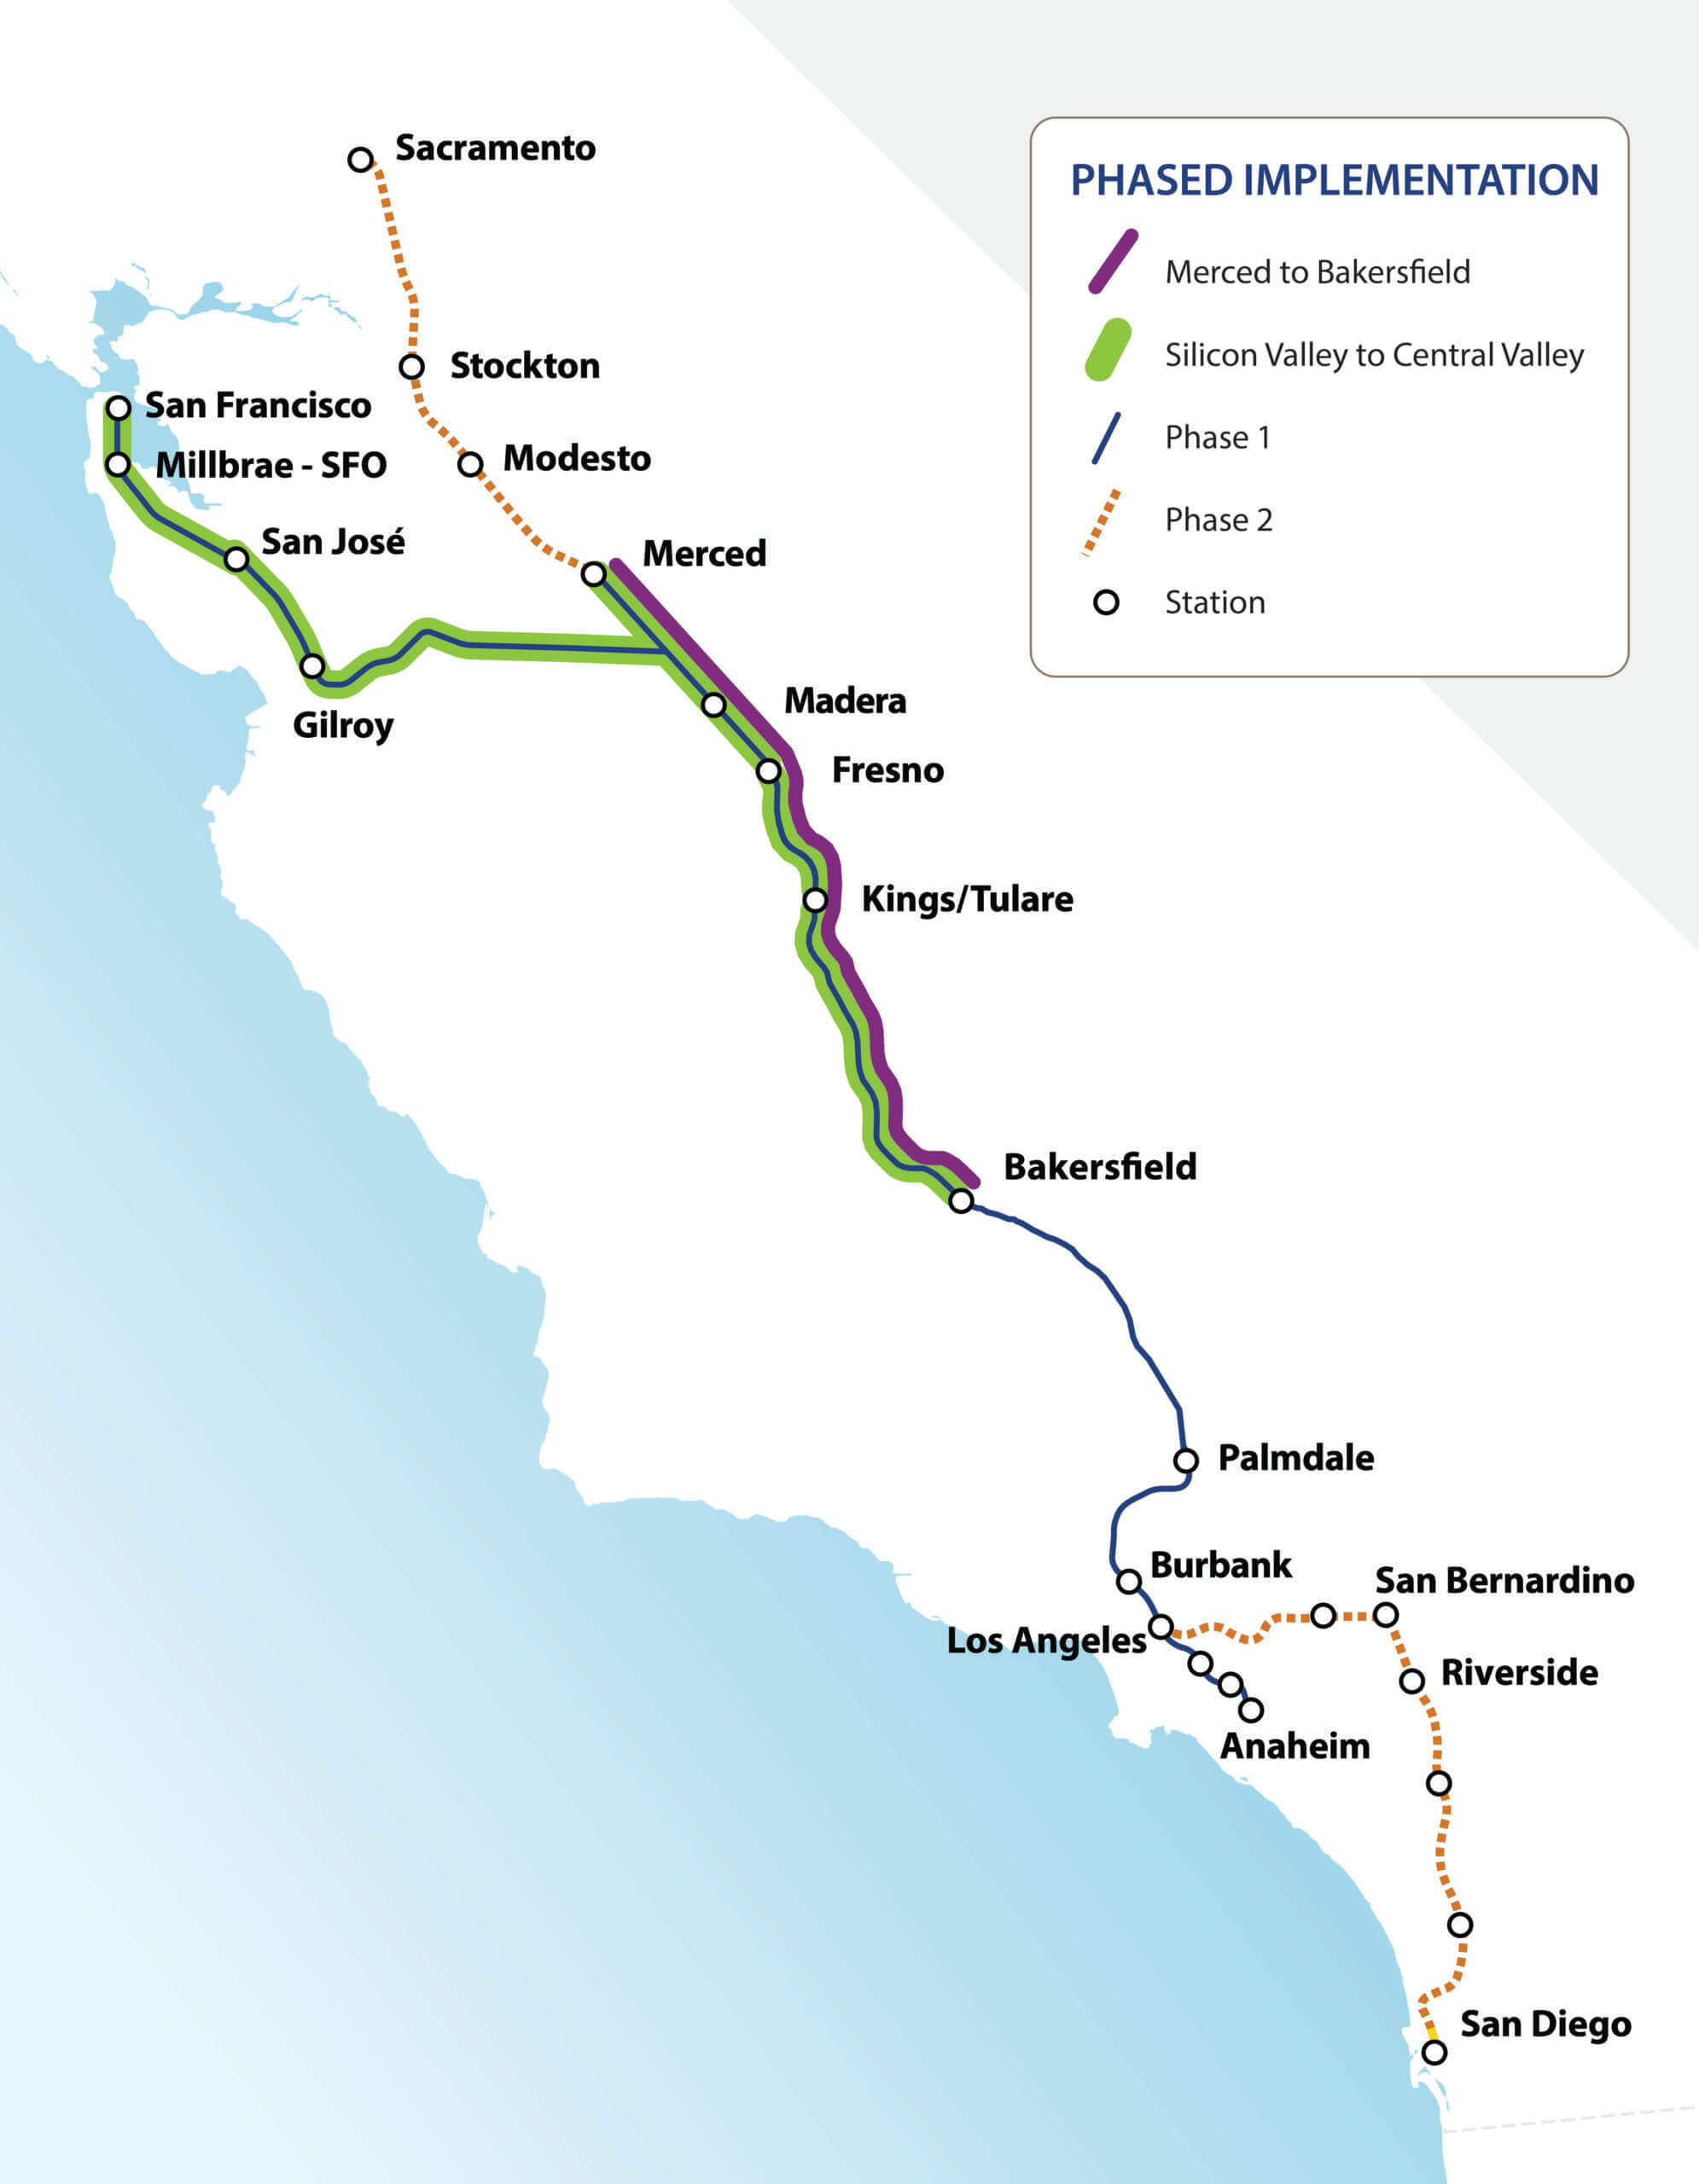 Phased Implementation map for California high-speed rail system